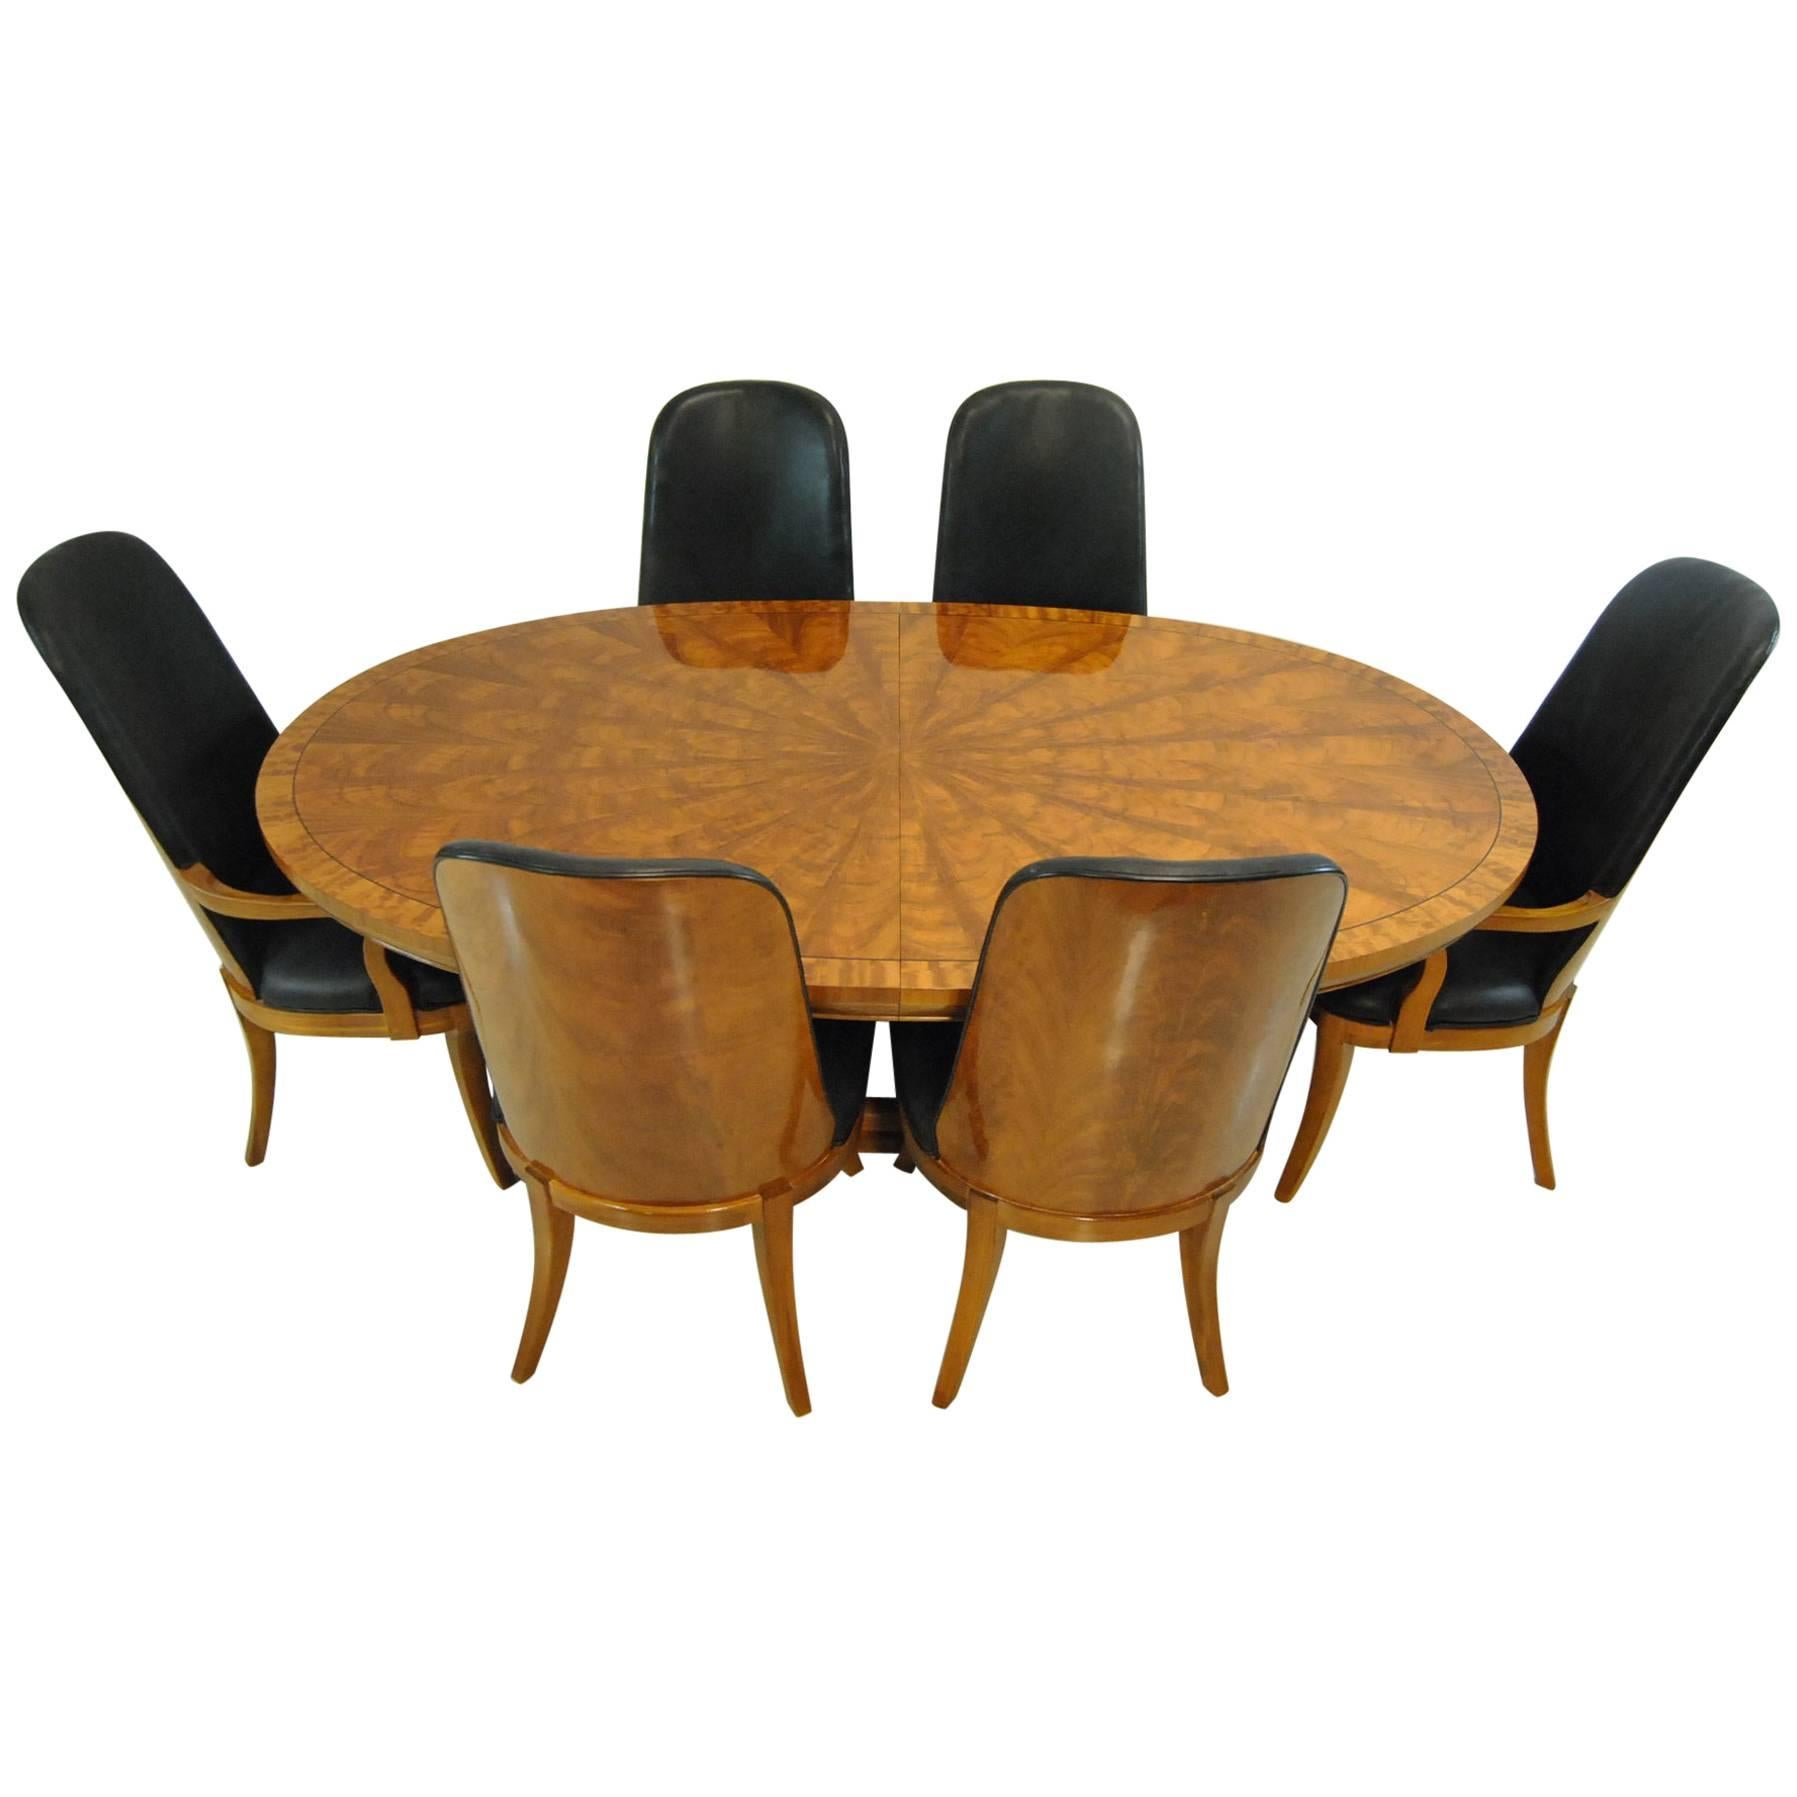 Starburst Double Pedestal Dining Table with Six Chairs by Henredon